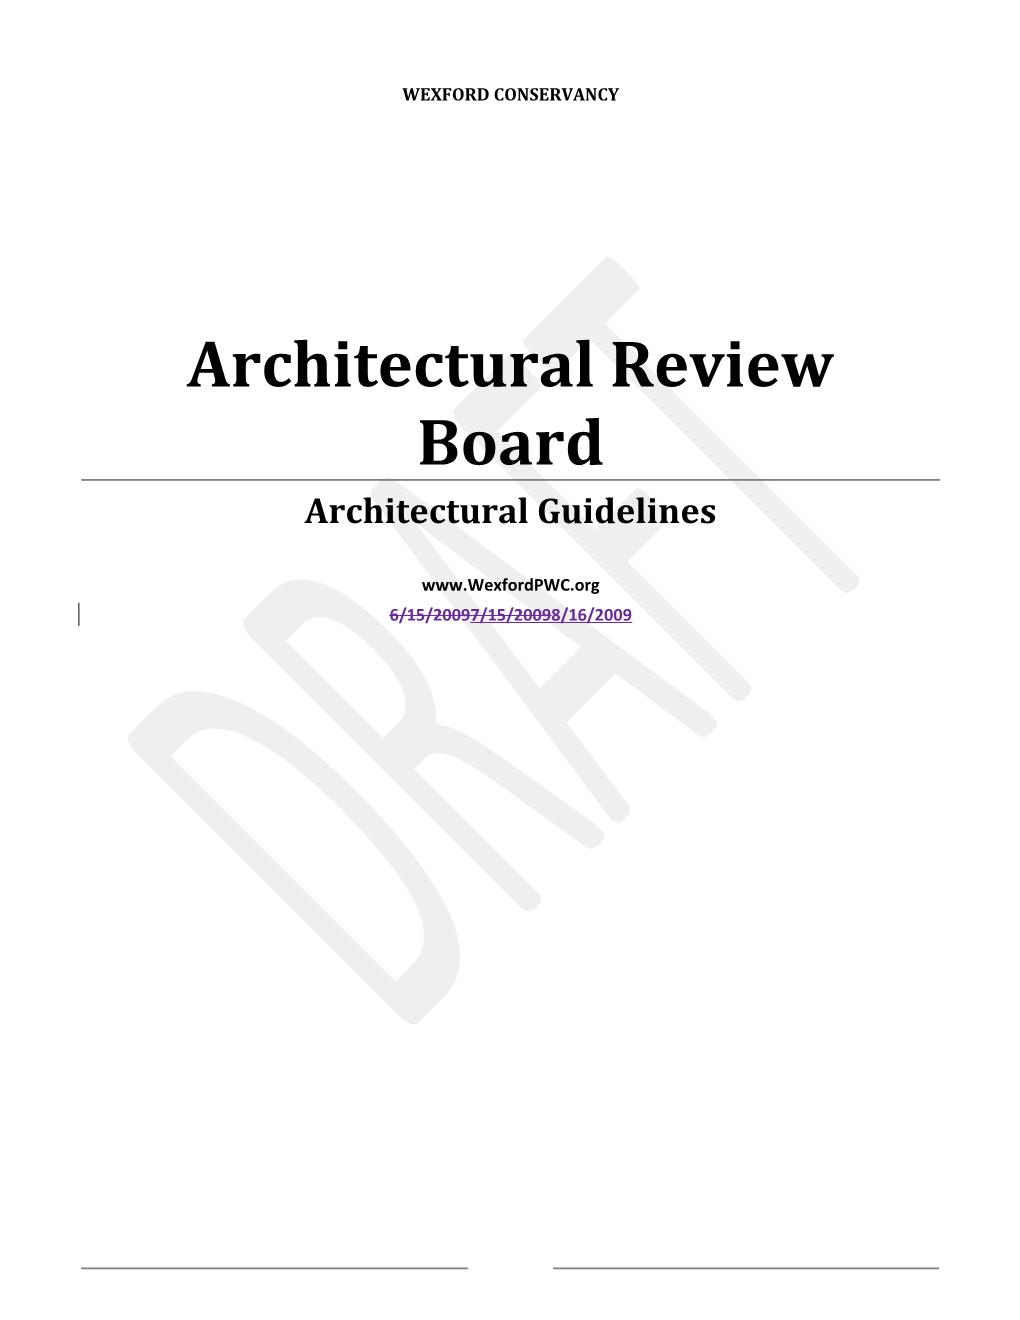 Architectural Review Board s4